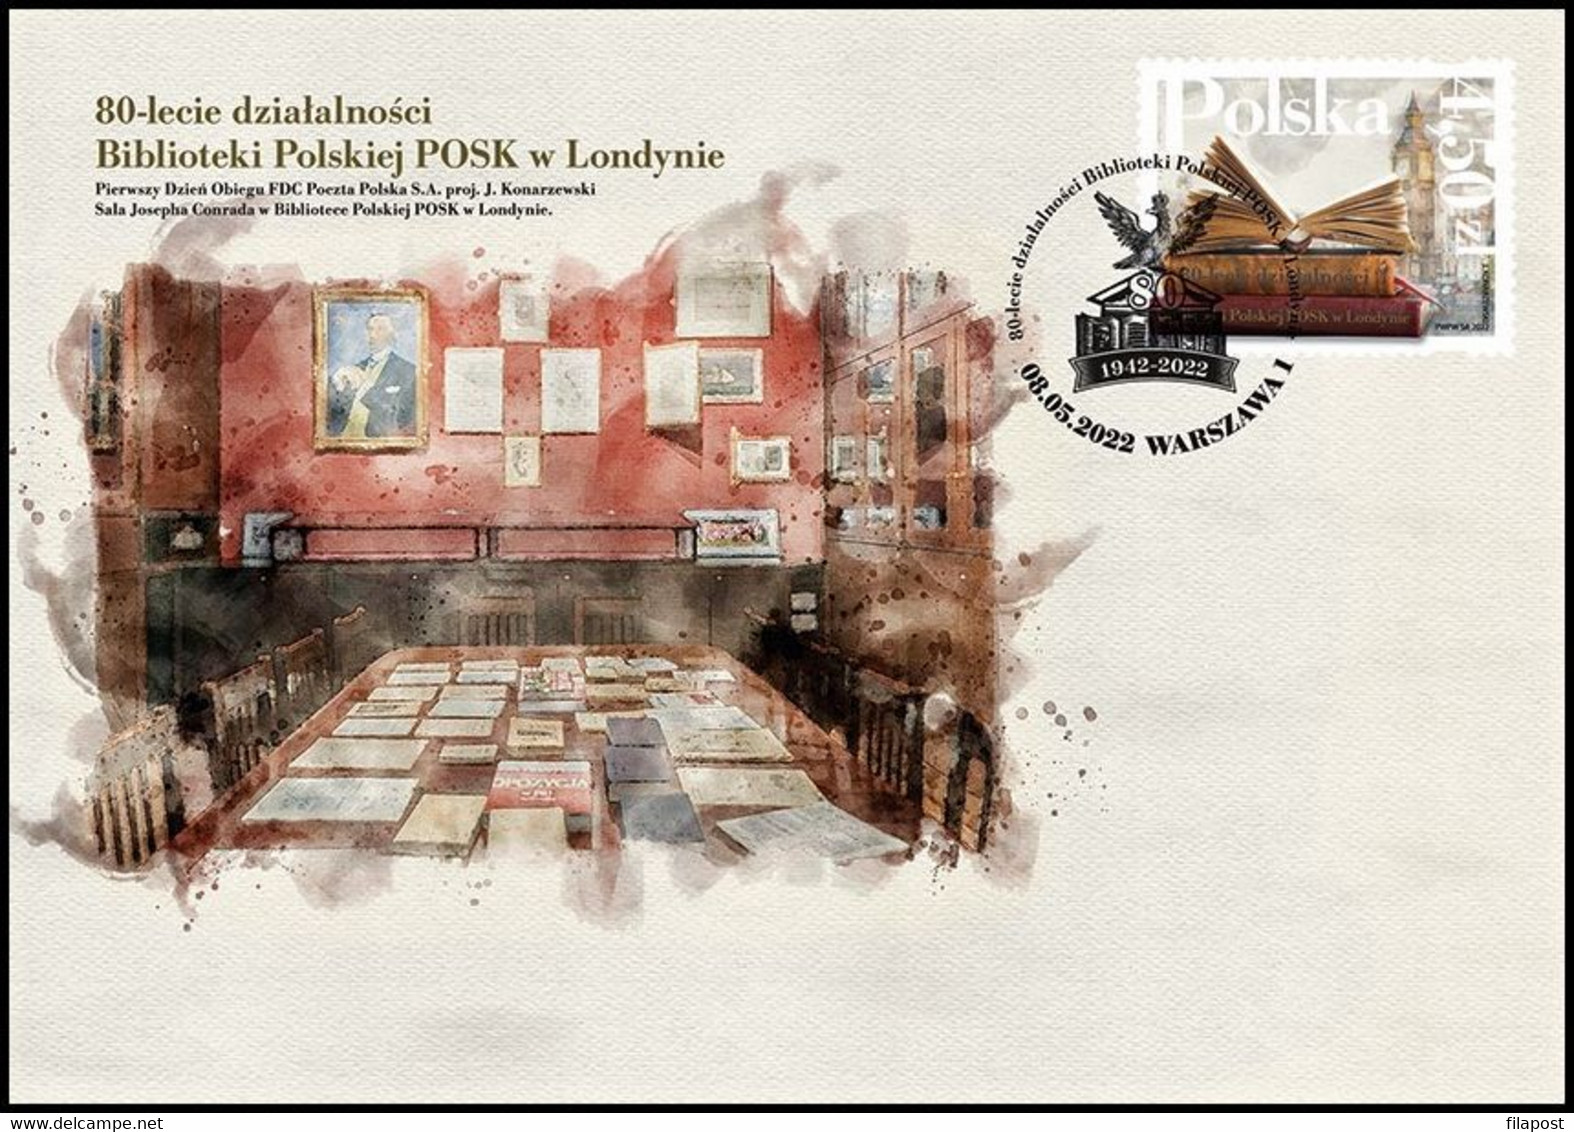 Poland 2022 / POSK Polish Library In London, Book, Big Ben Tower, Books, Archives, Manuscripts / Full Sheet FDC New!!! - Briefe U. Dokumente